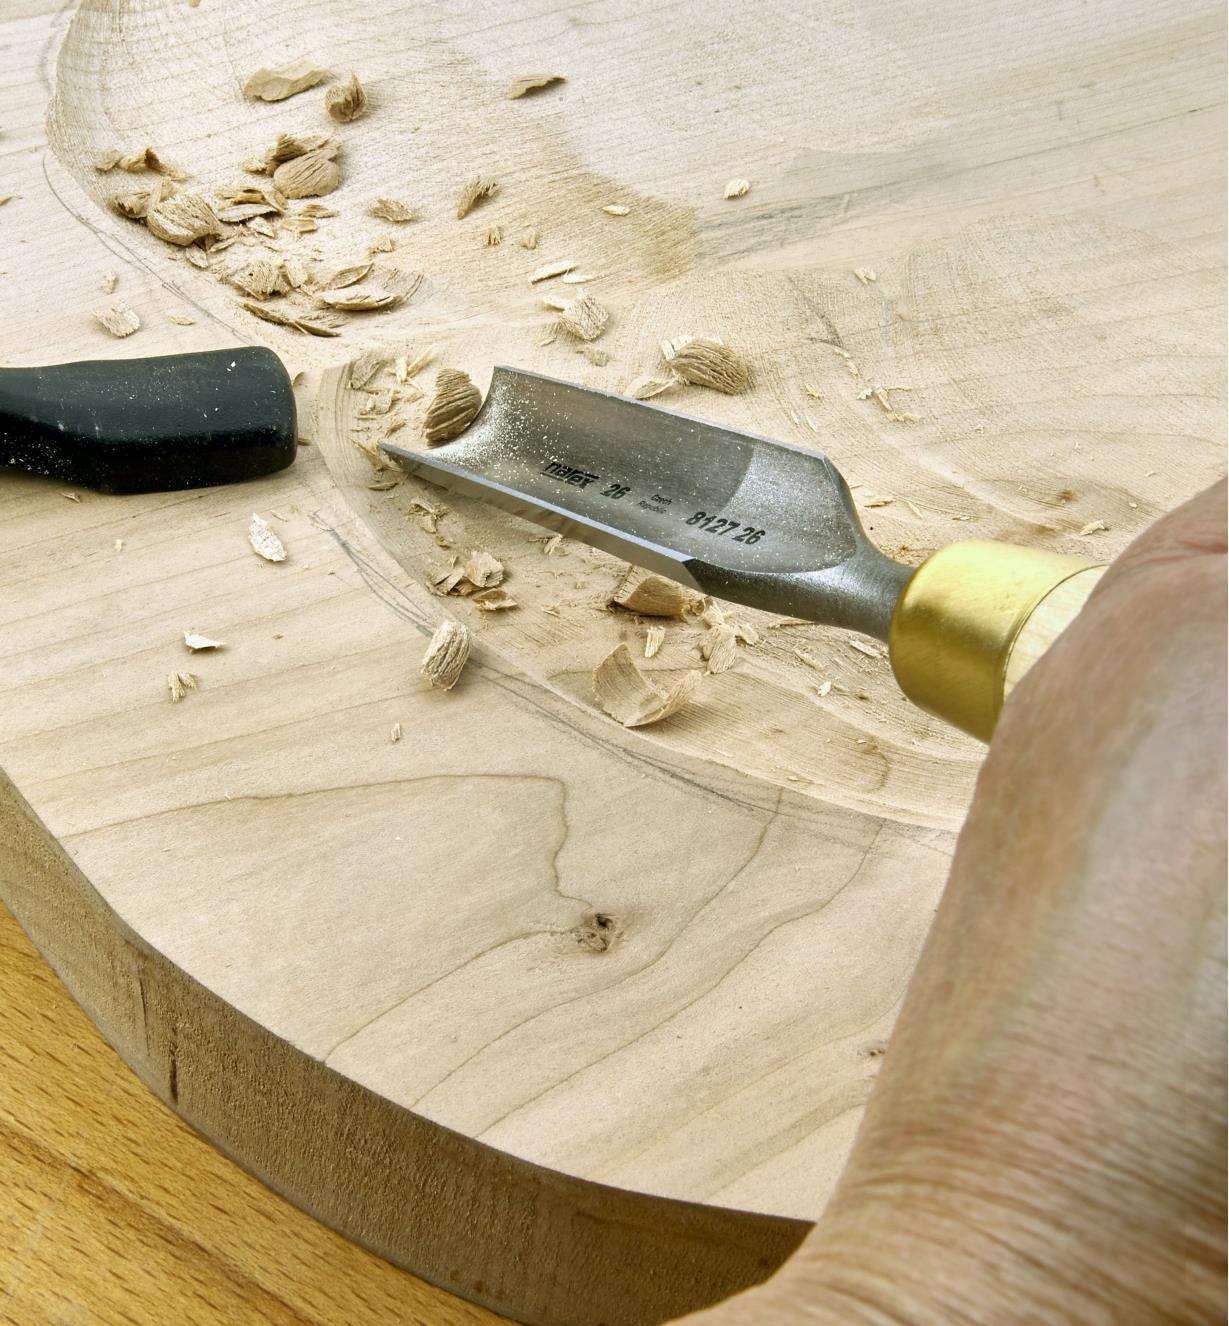 Using a 26mm firmer gouge to saddle a wooden chair seat